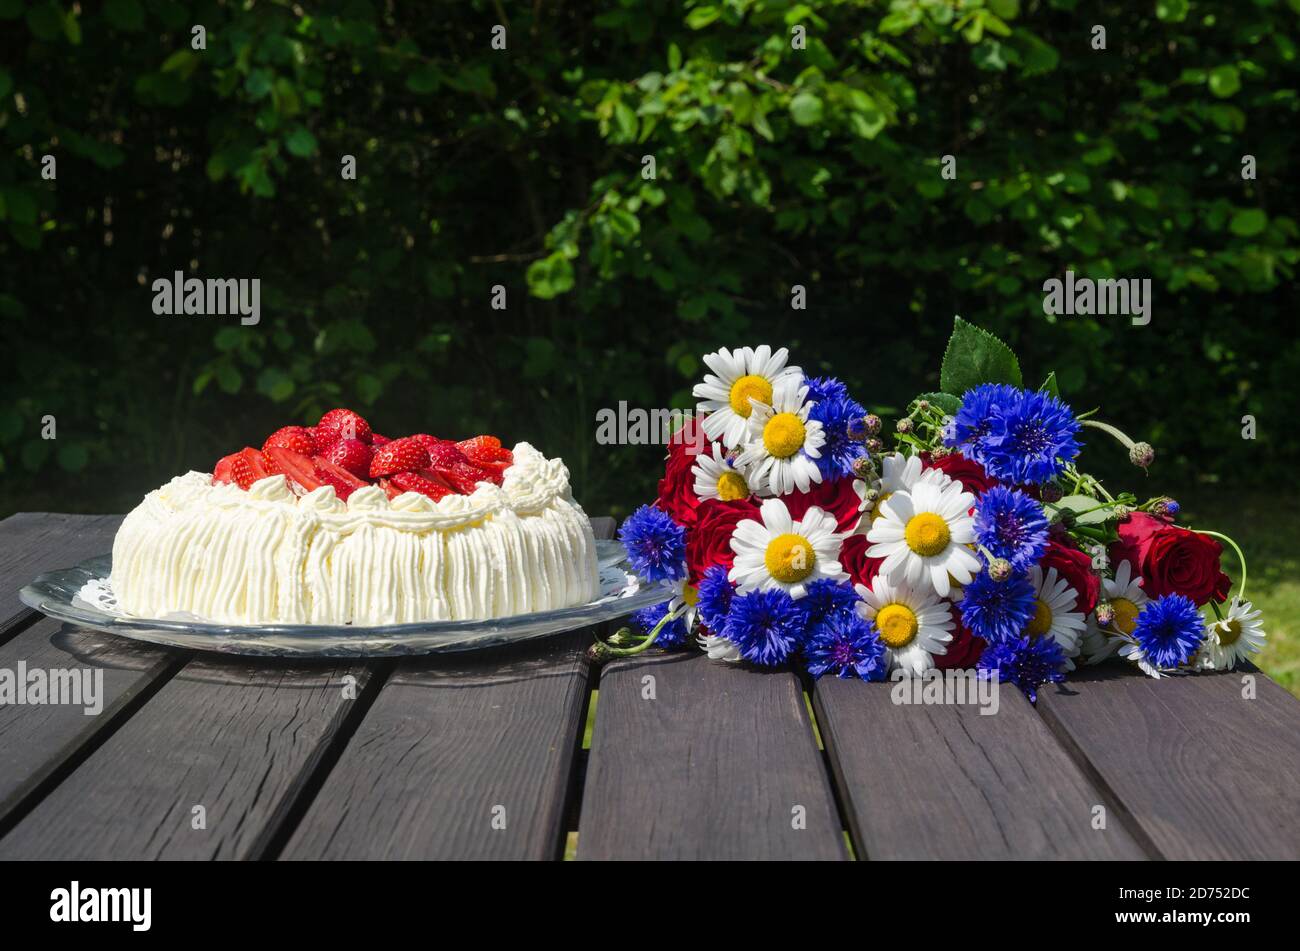 Atrawberry cream cake and summer flowers on a table in a garden Stock Photo